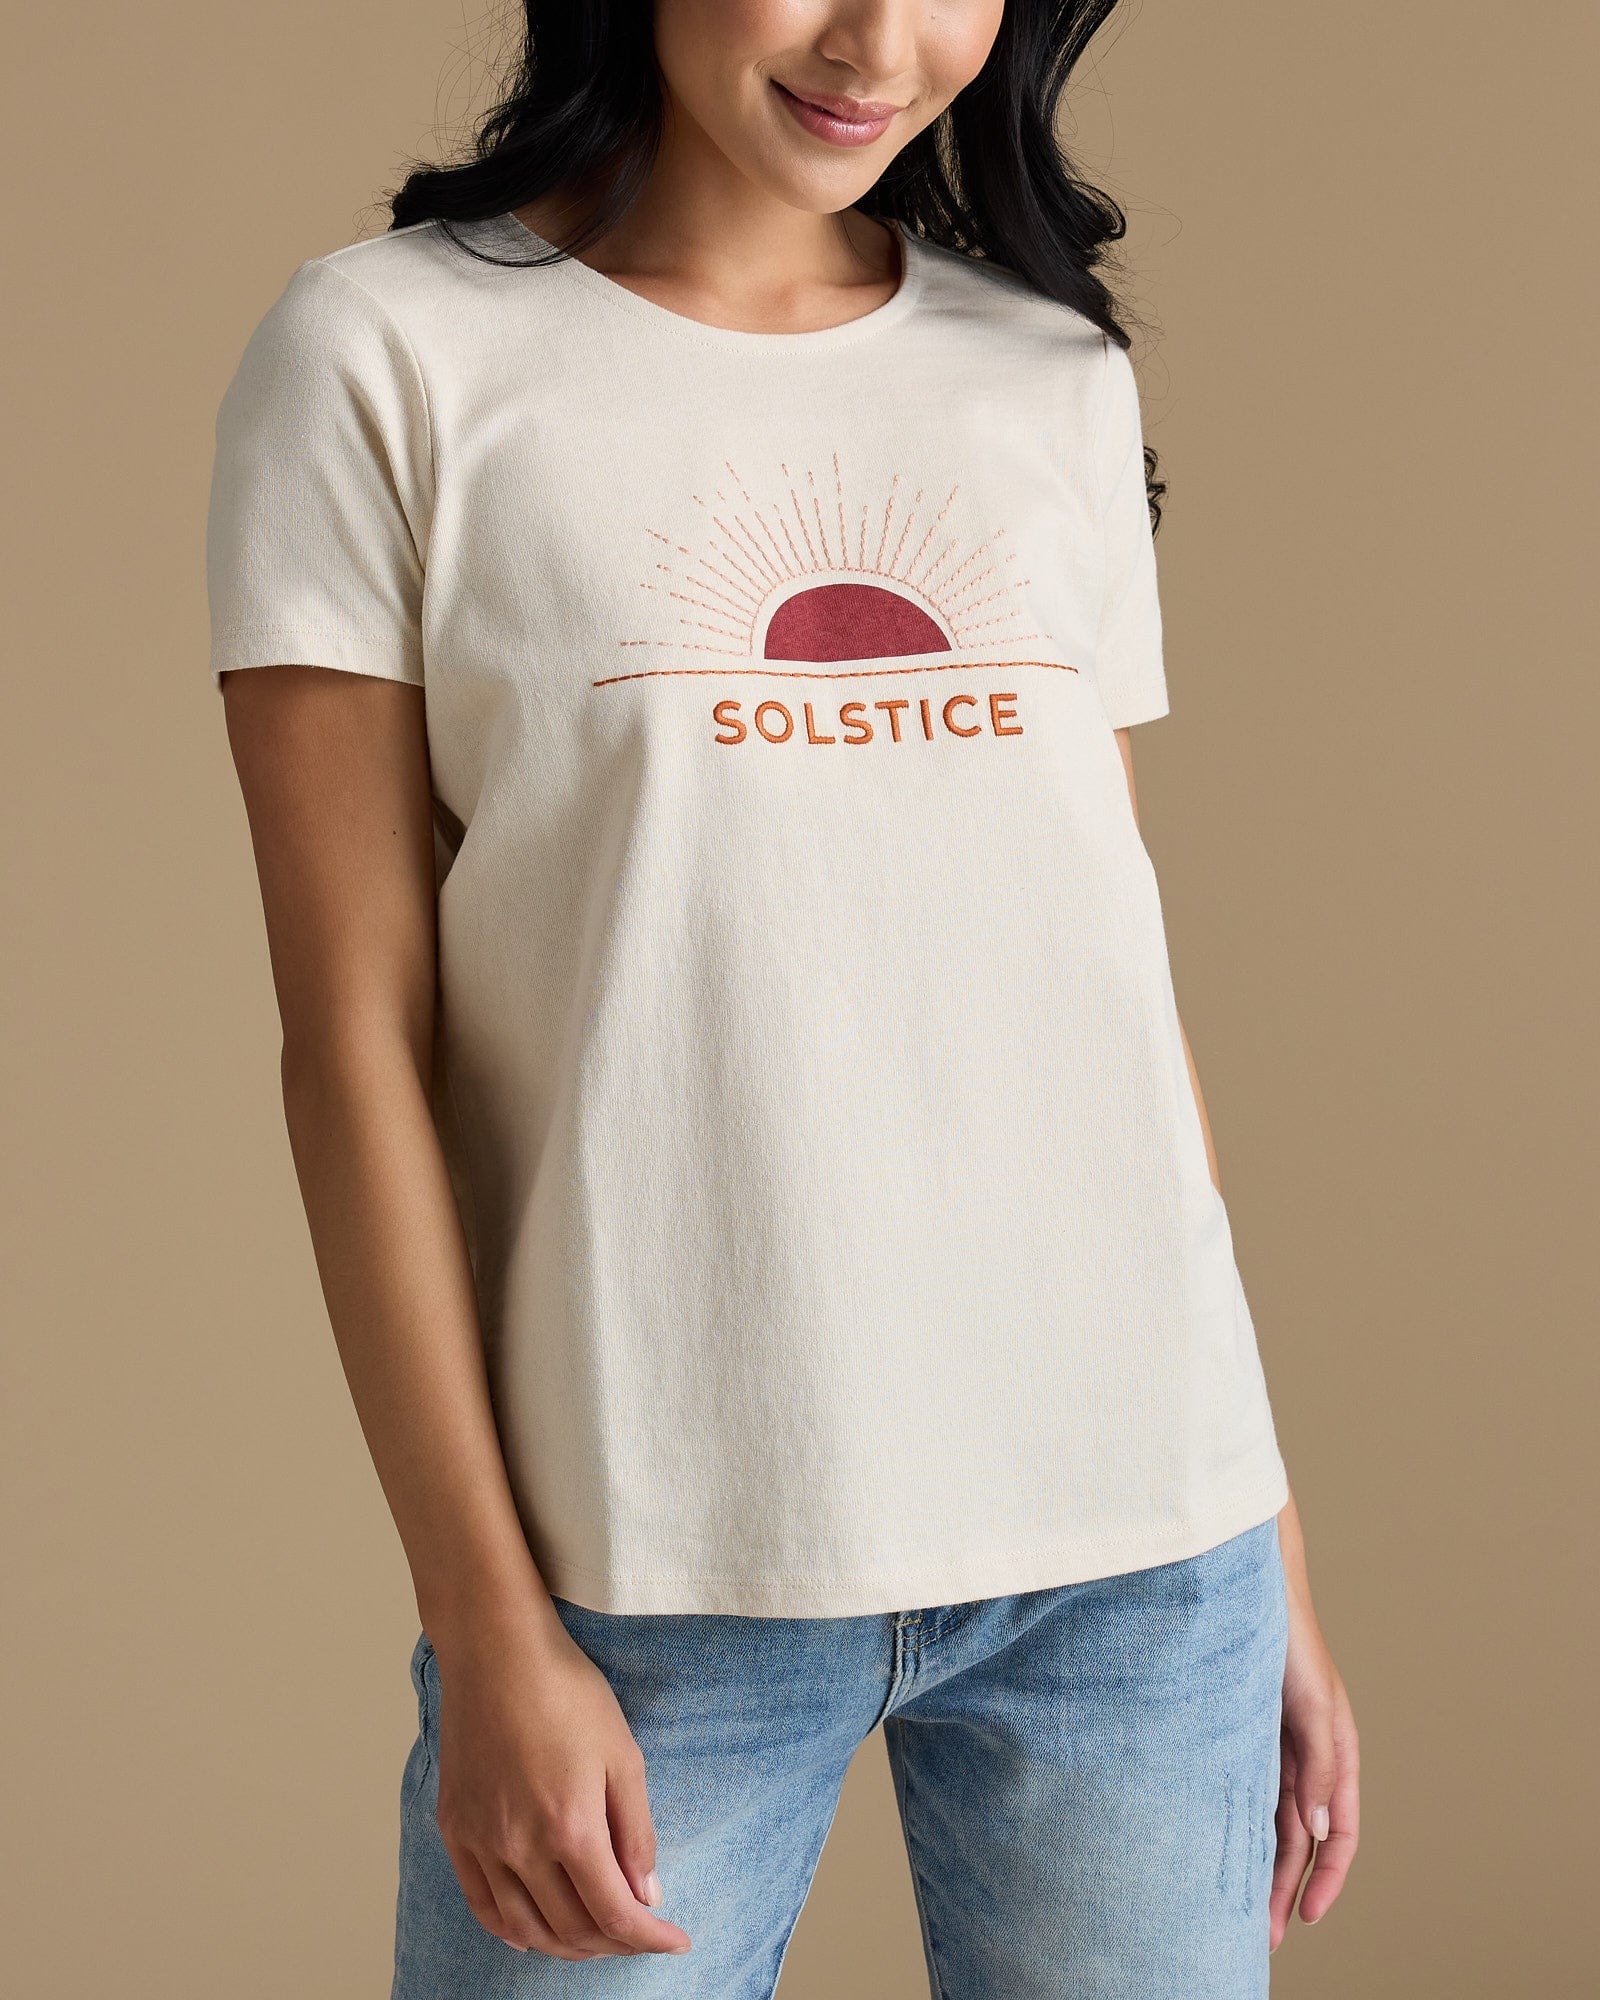 Woman in a tan graphic tee that says "solstice"